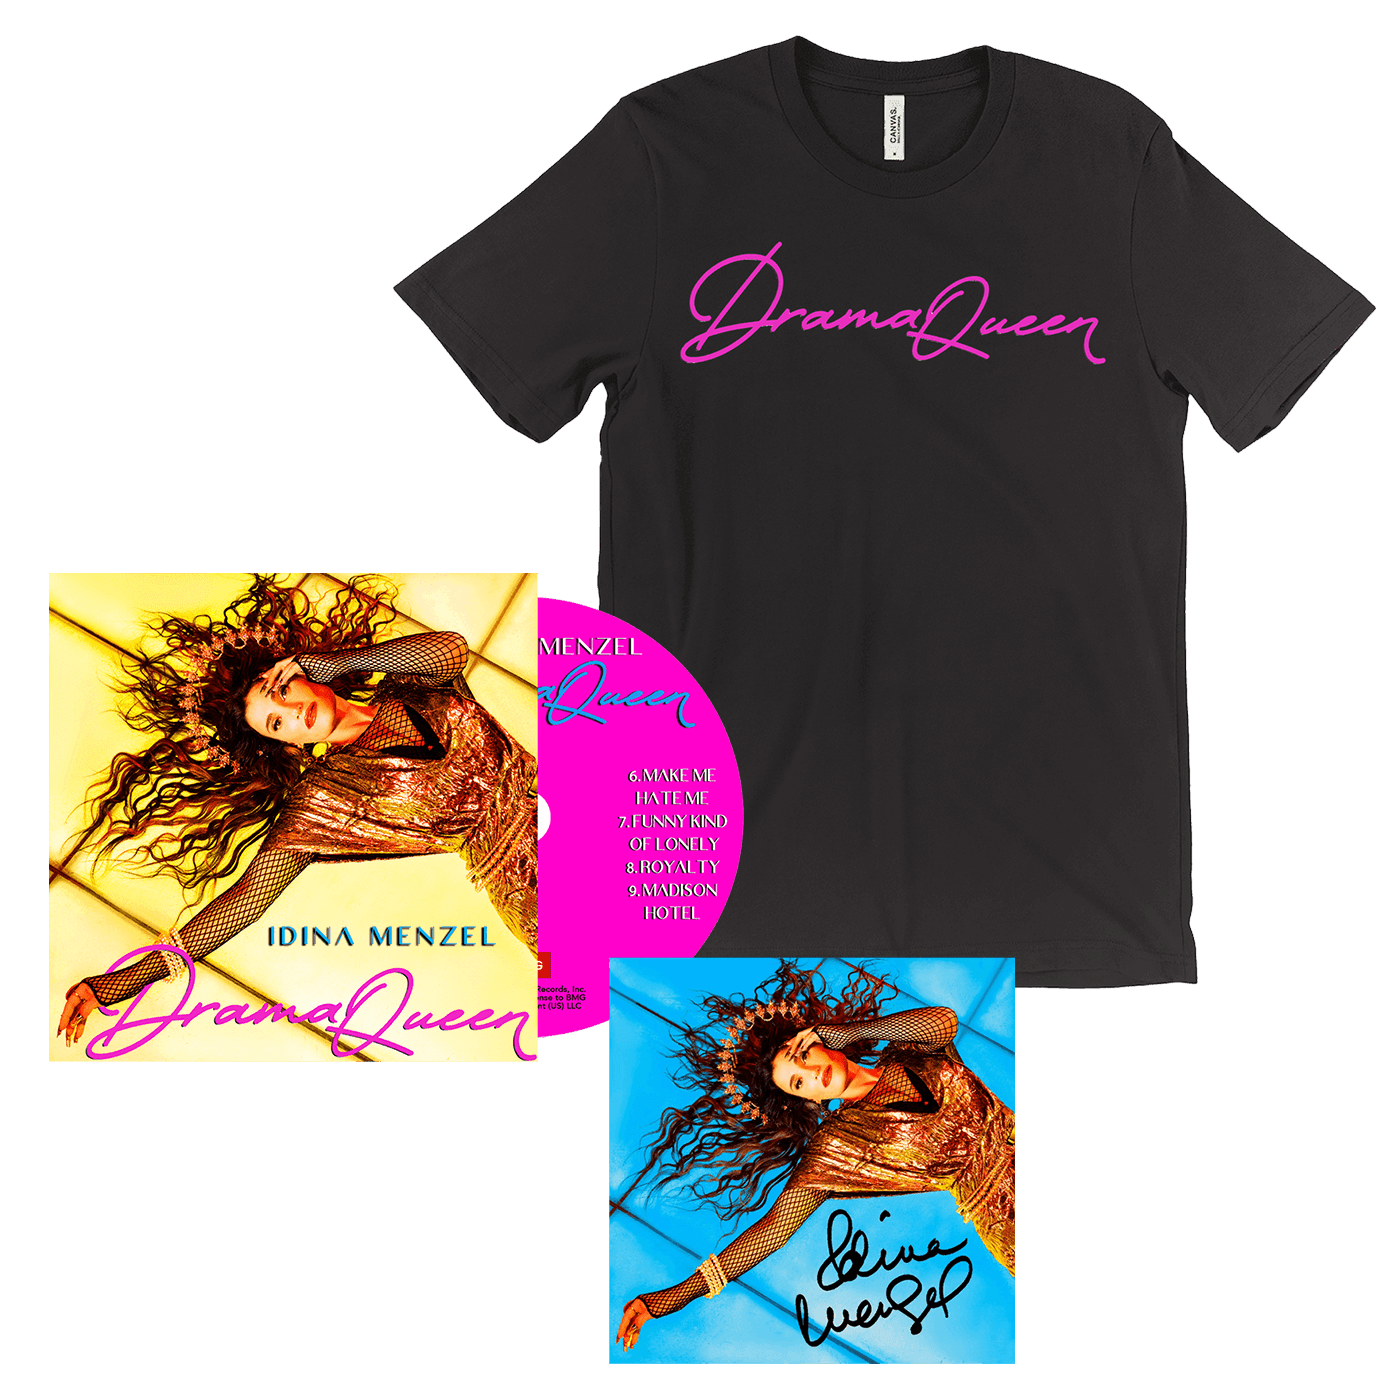 Drama Queen Tee + Signed CD